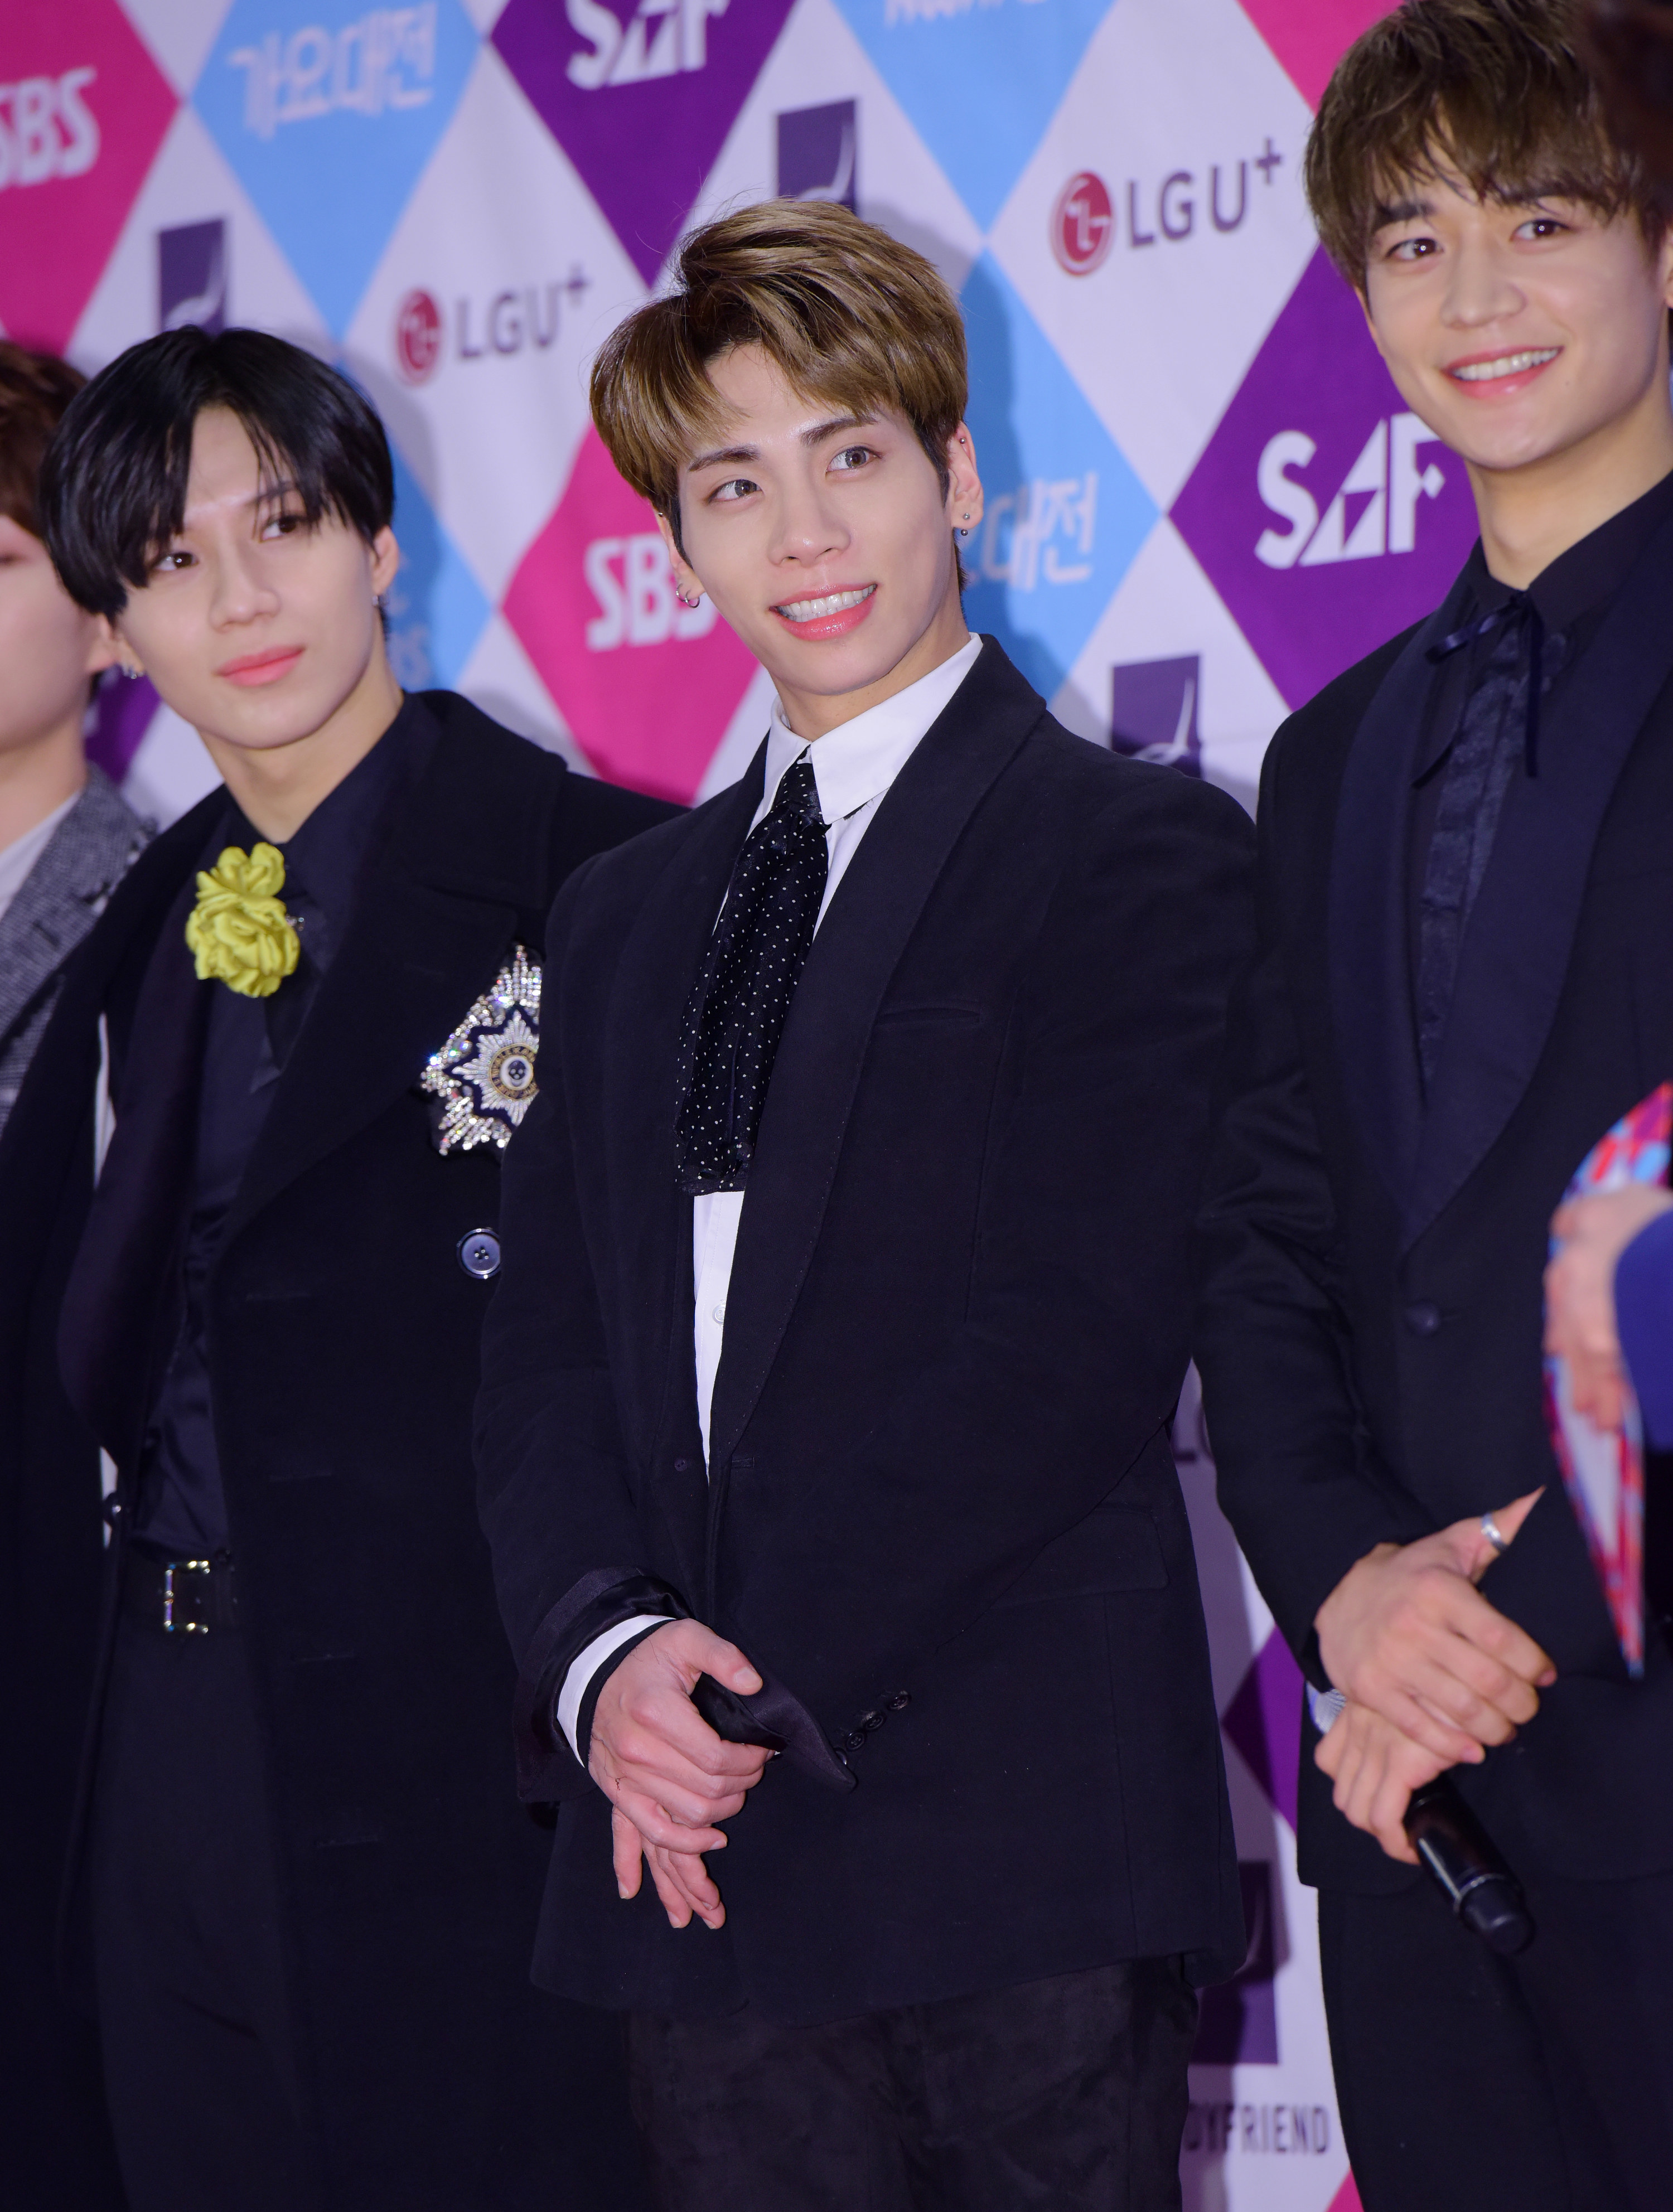 Jonghyun smiles, with band mate Taemin to his right and Minho to his left.